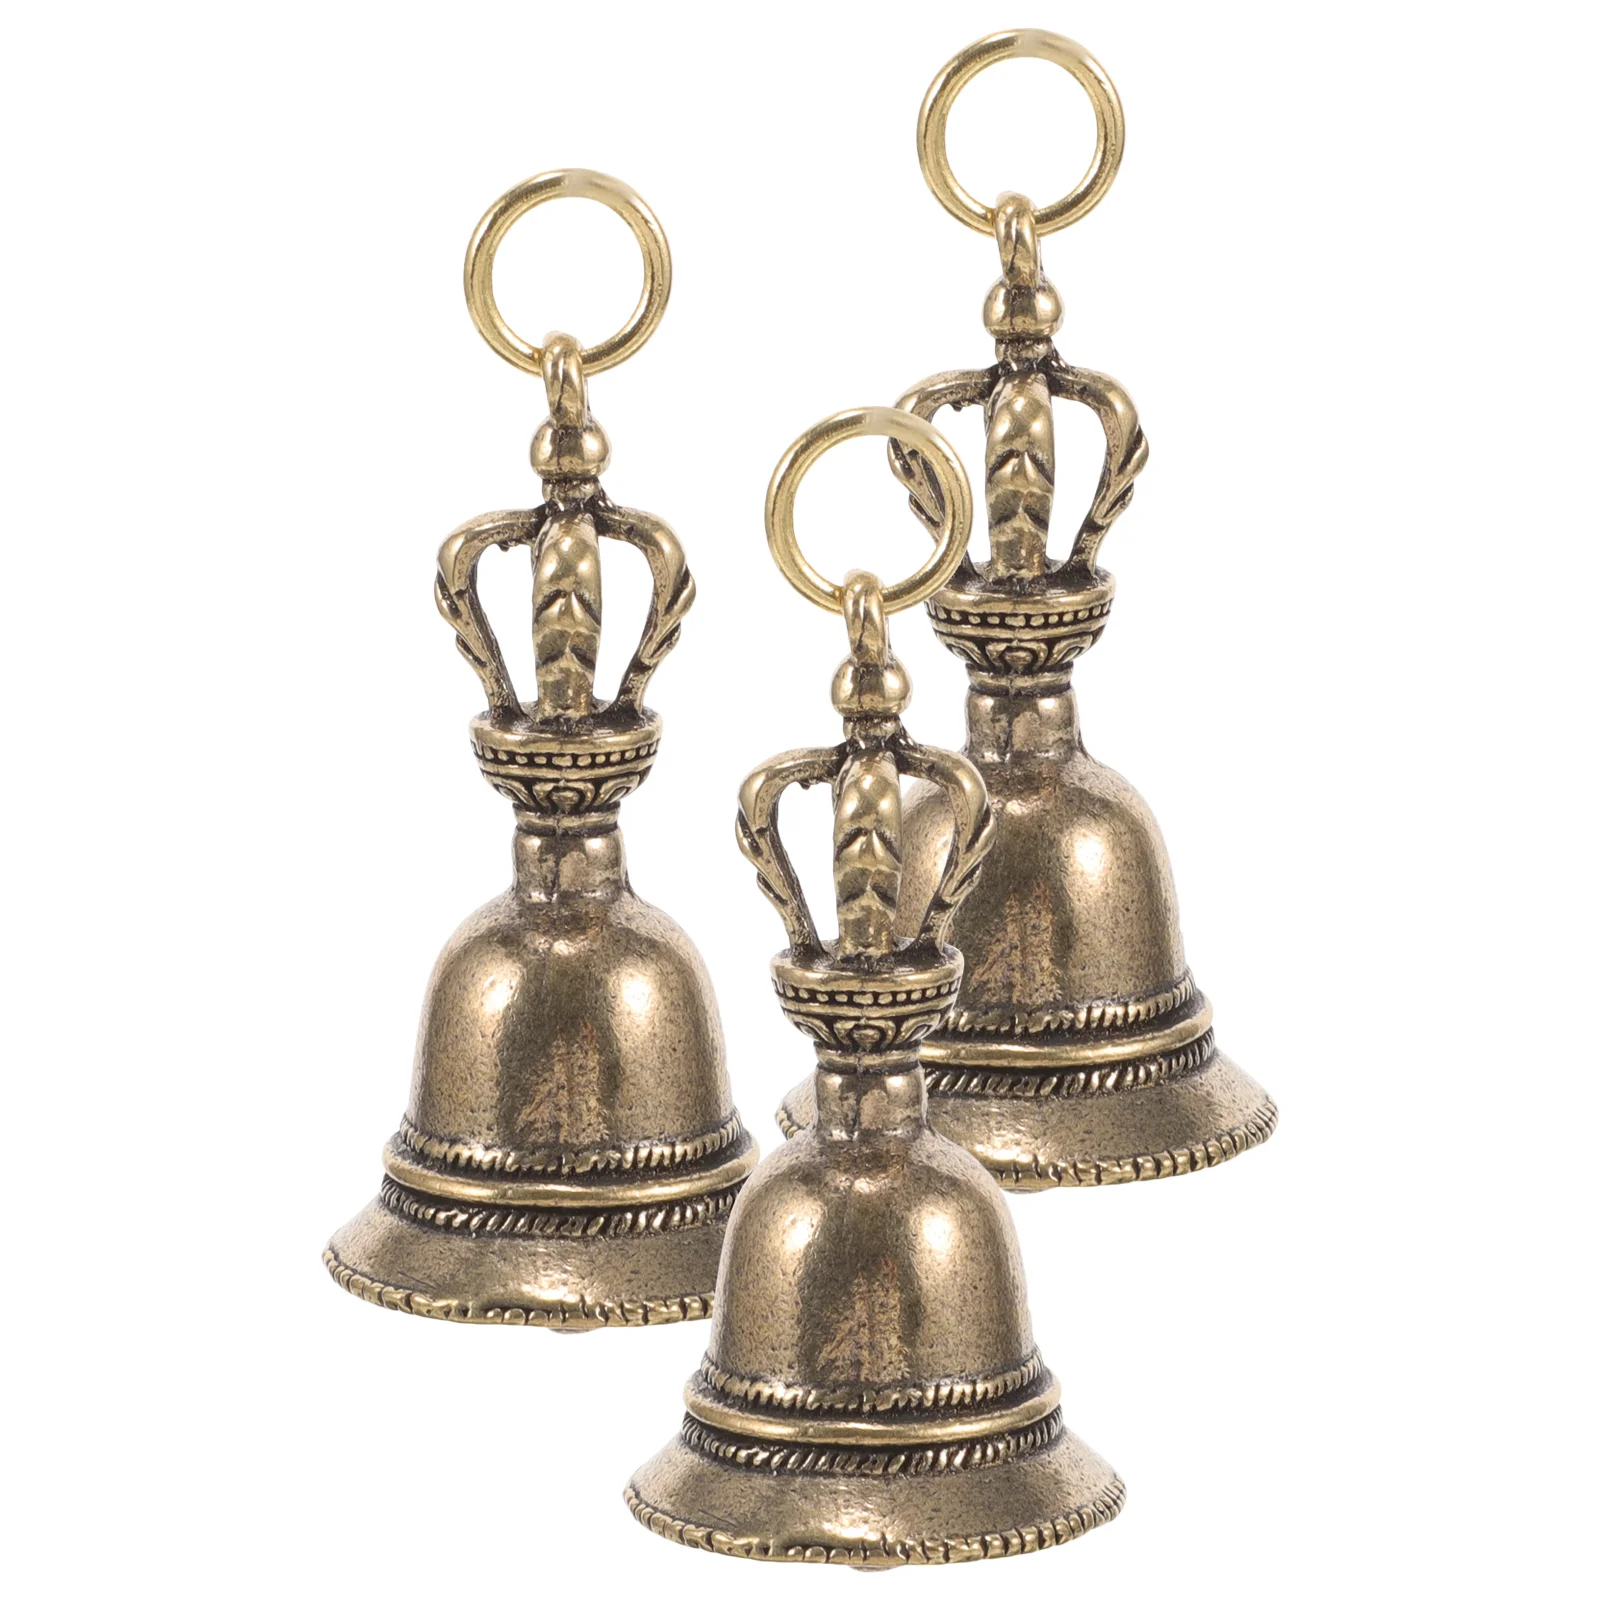 

3 Pcs Bell Keychain Brass Bells Ornaments Quiz Charm DIY Making Charms Cow Christmas Jewelry Fob